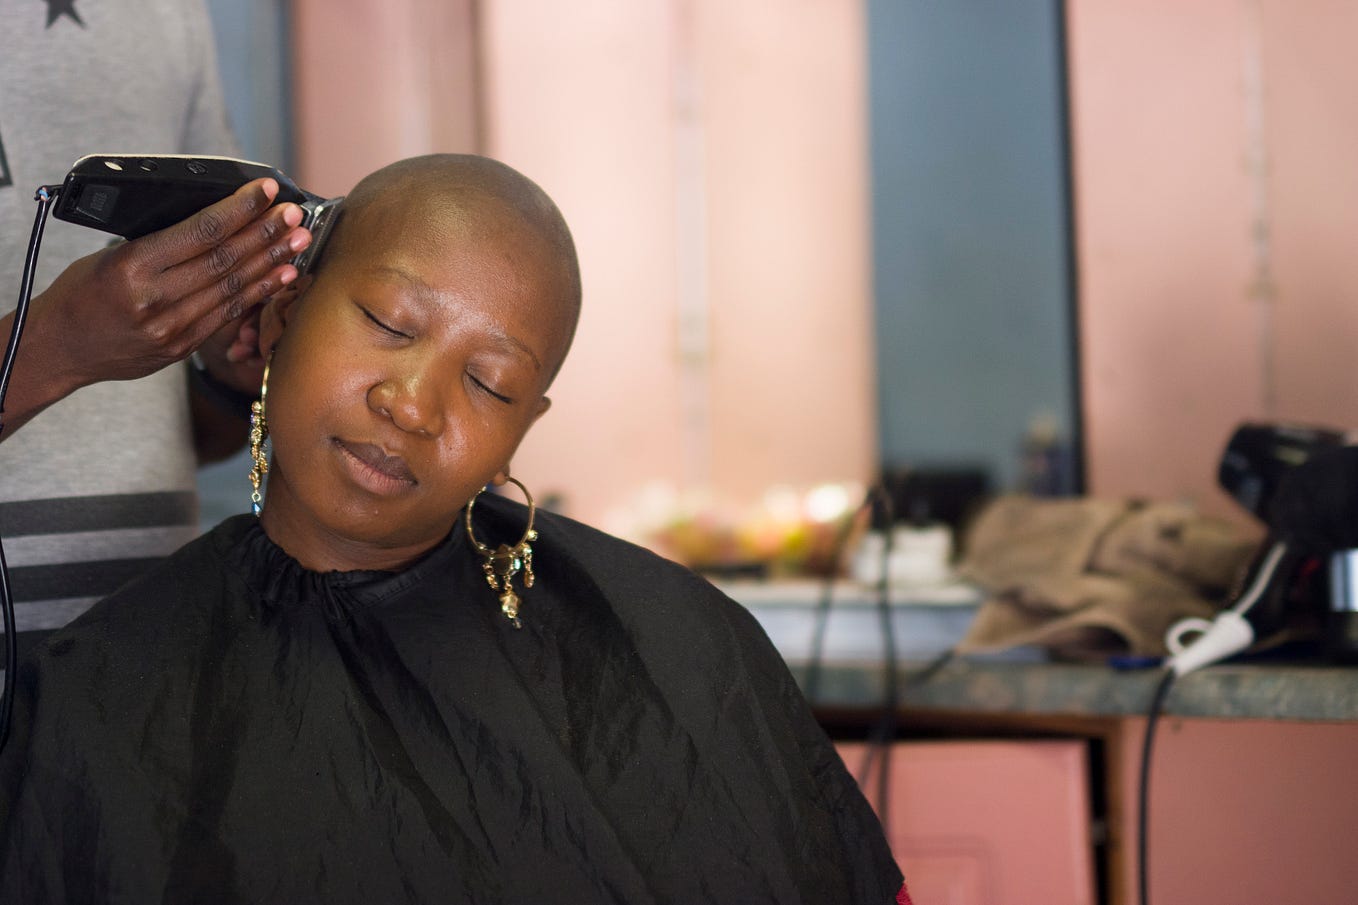 Black woman shaving her hair, with a peaceful expression.